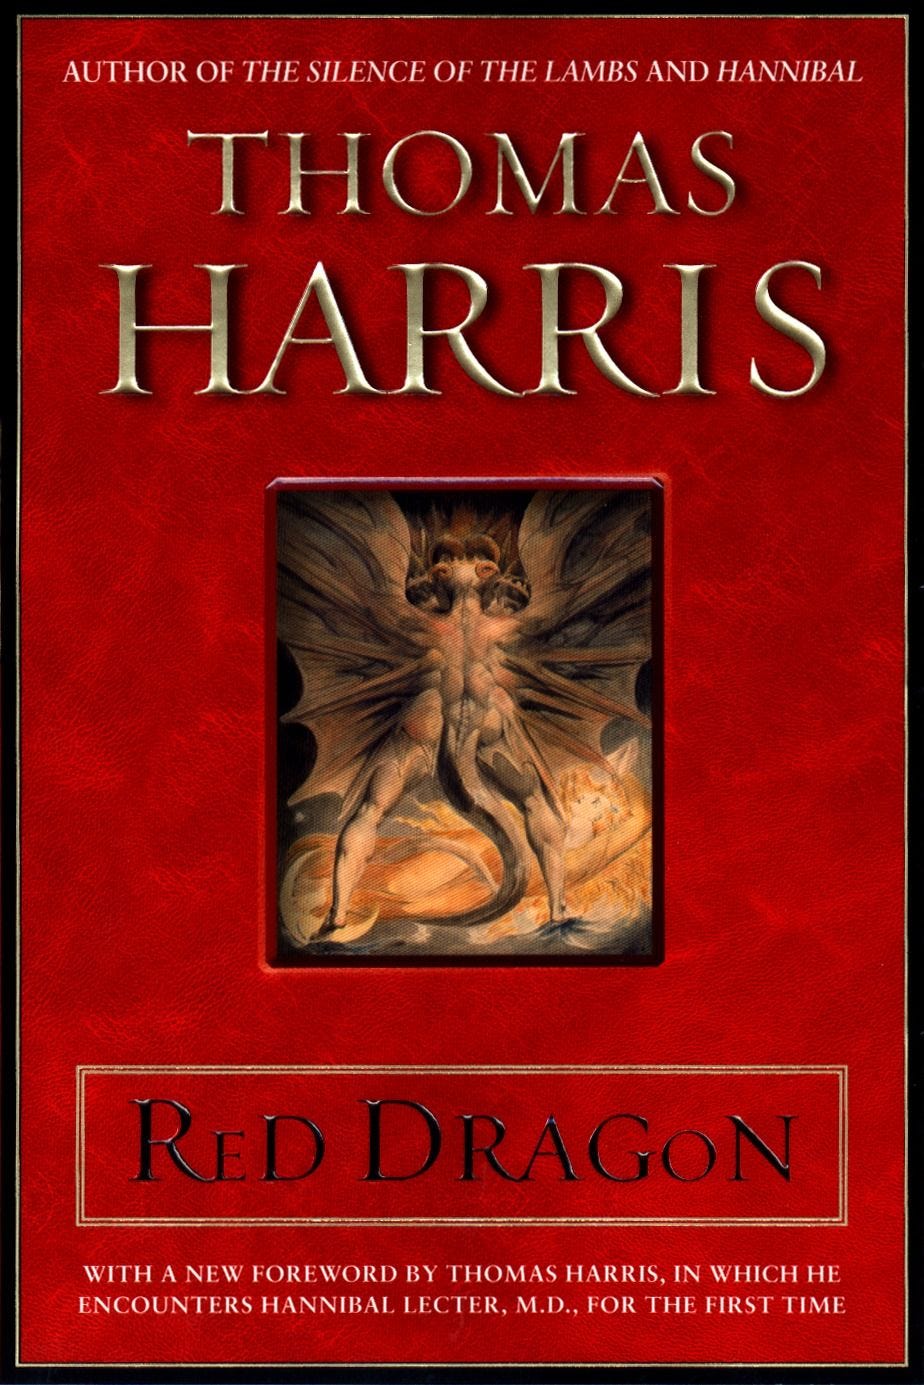 Red Dragon (Hannibal Lecter Series) by Thomas Harris - Hardcover - 2000 -  from Crestview Books (SKU: 077018)